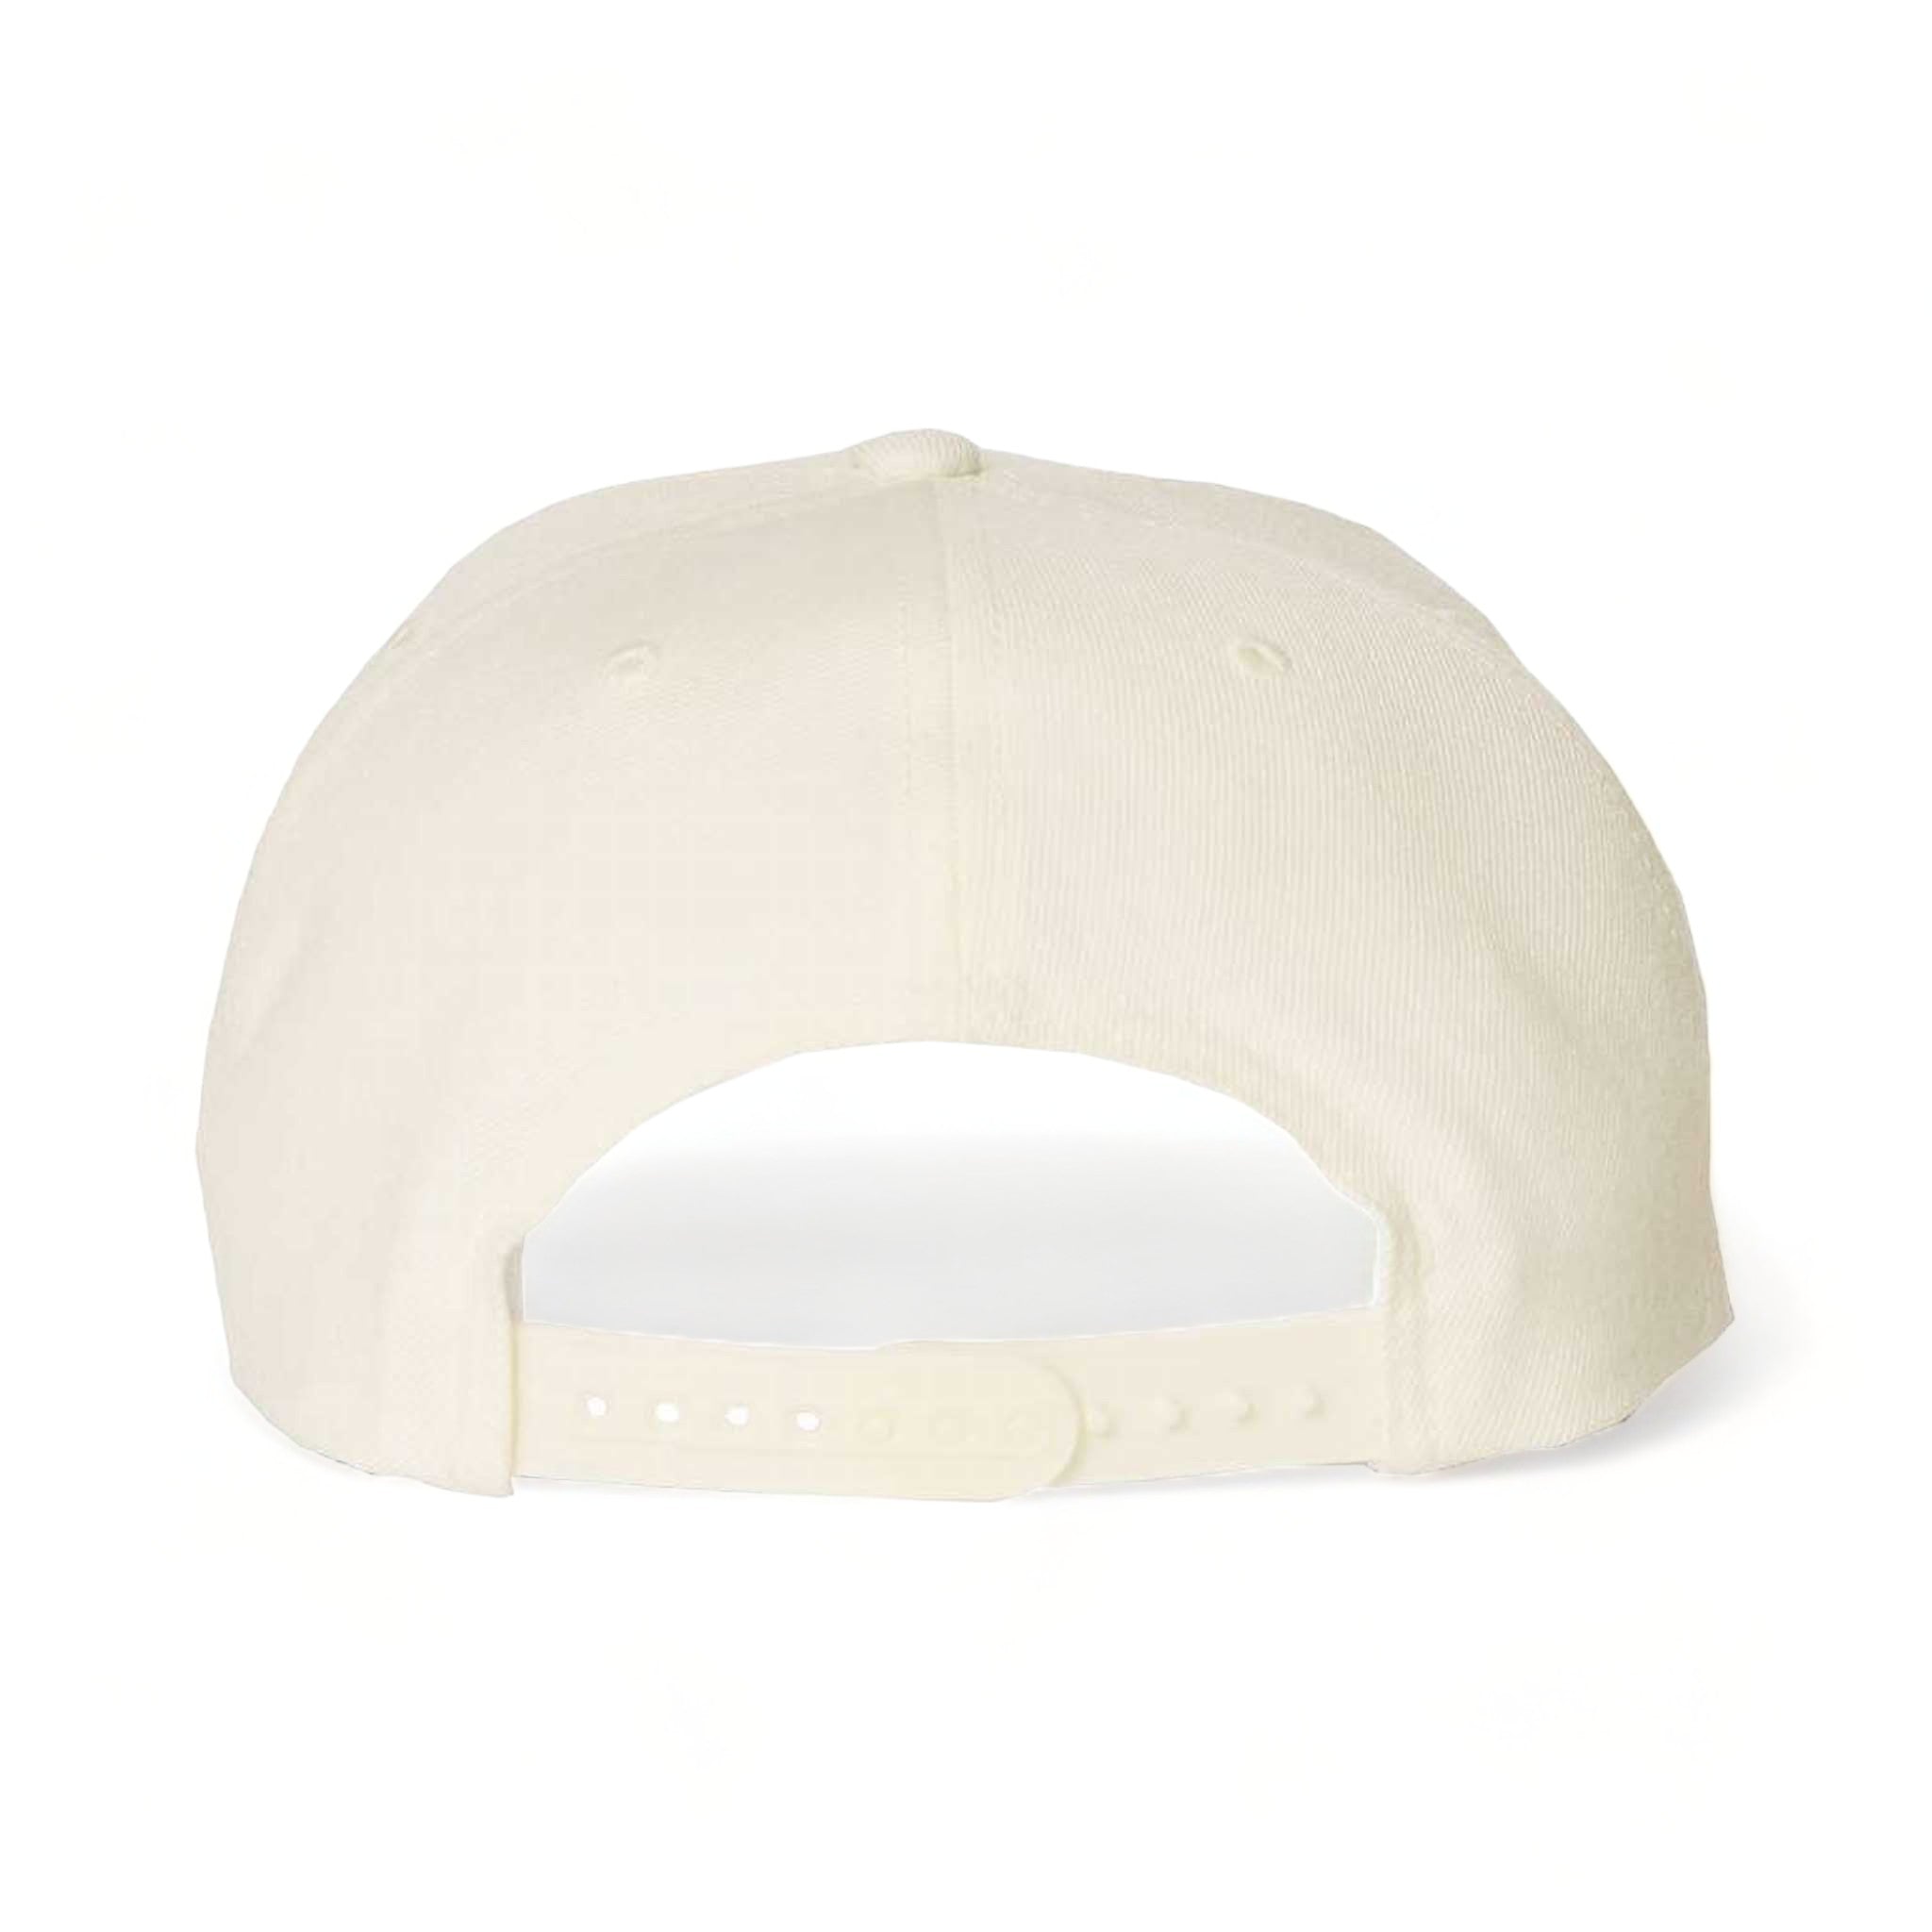 Back view of YP Classics 6089M custom hat in natural